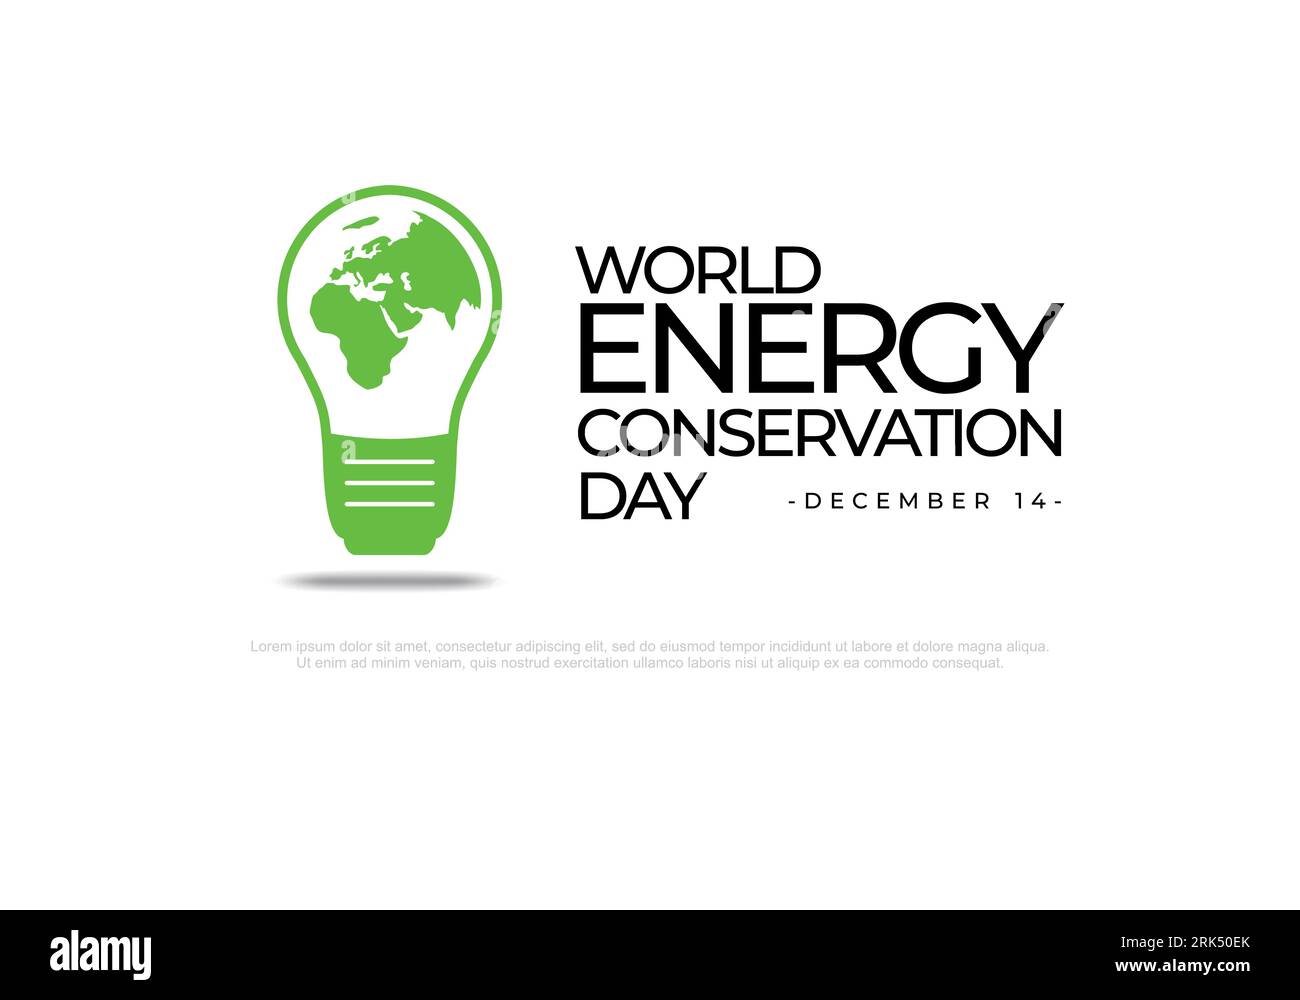 National energy conservation day background celebrated on december 14. Stock Vector